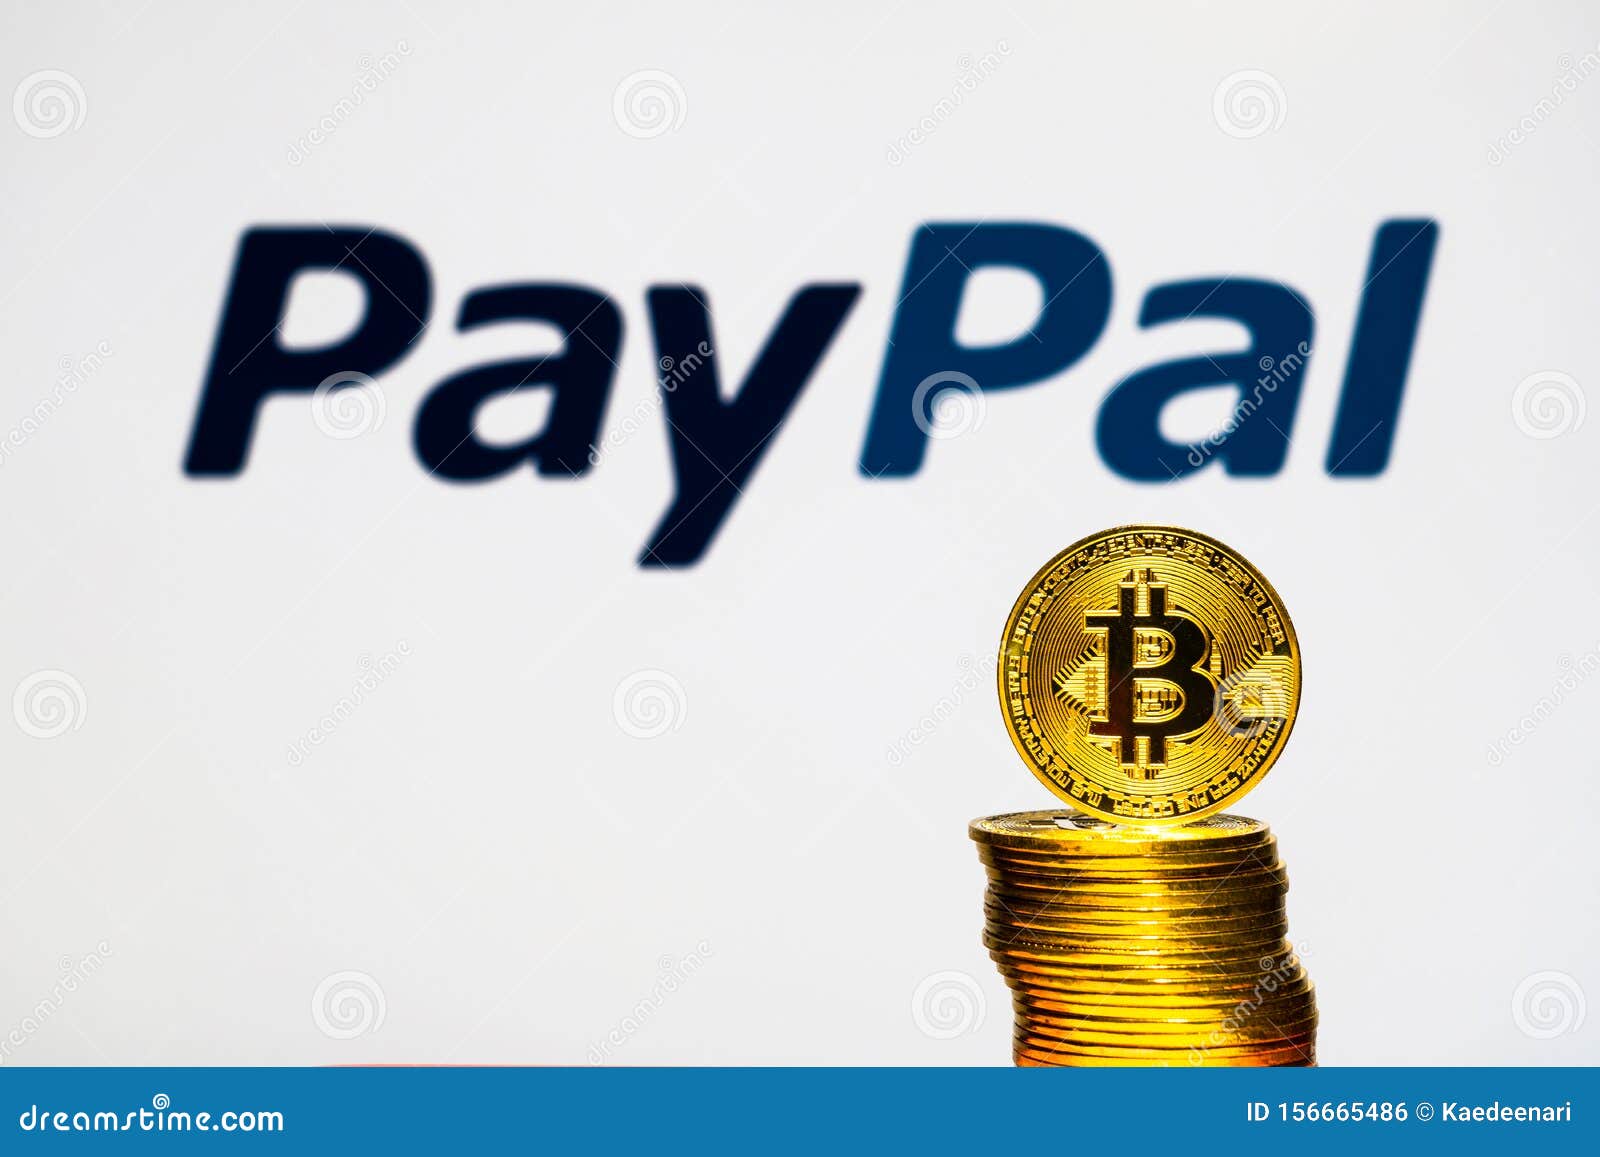 Buy Horse (Profile Background) from Steam  Payment from PayPal, Webmoney,  BitCoin (BTC)